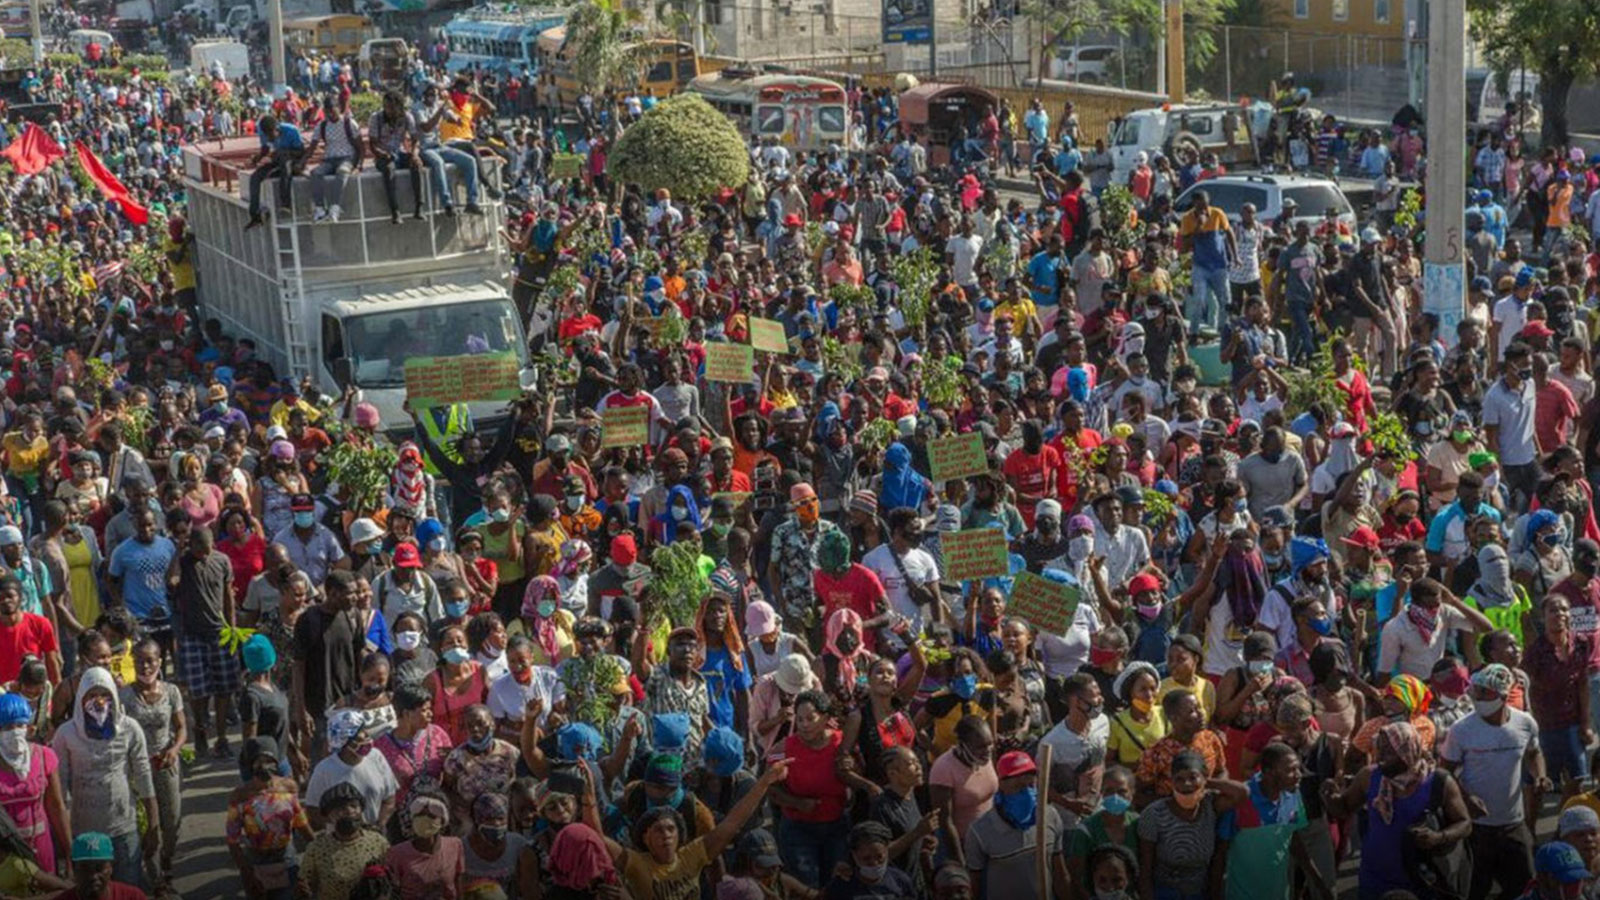 Haiti: The ransom is still being paid